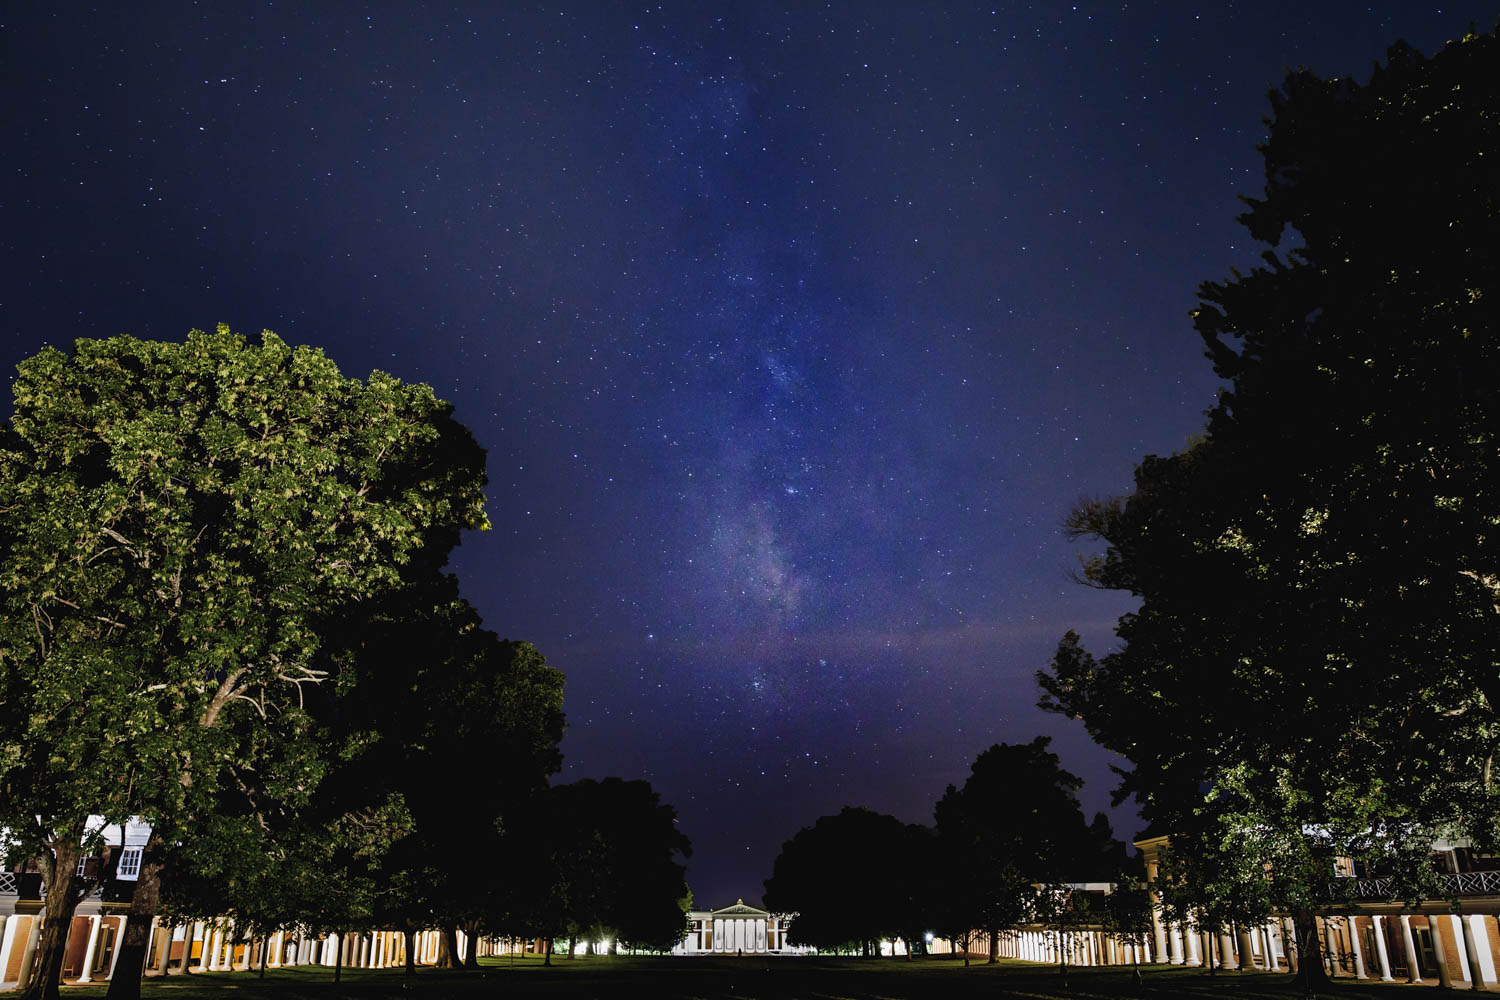 Cabell hall from the lawn at night with the milkway above it